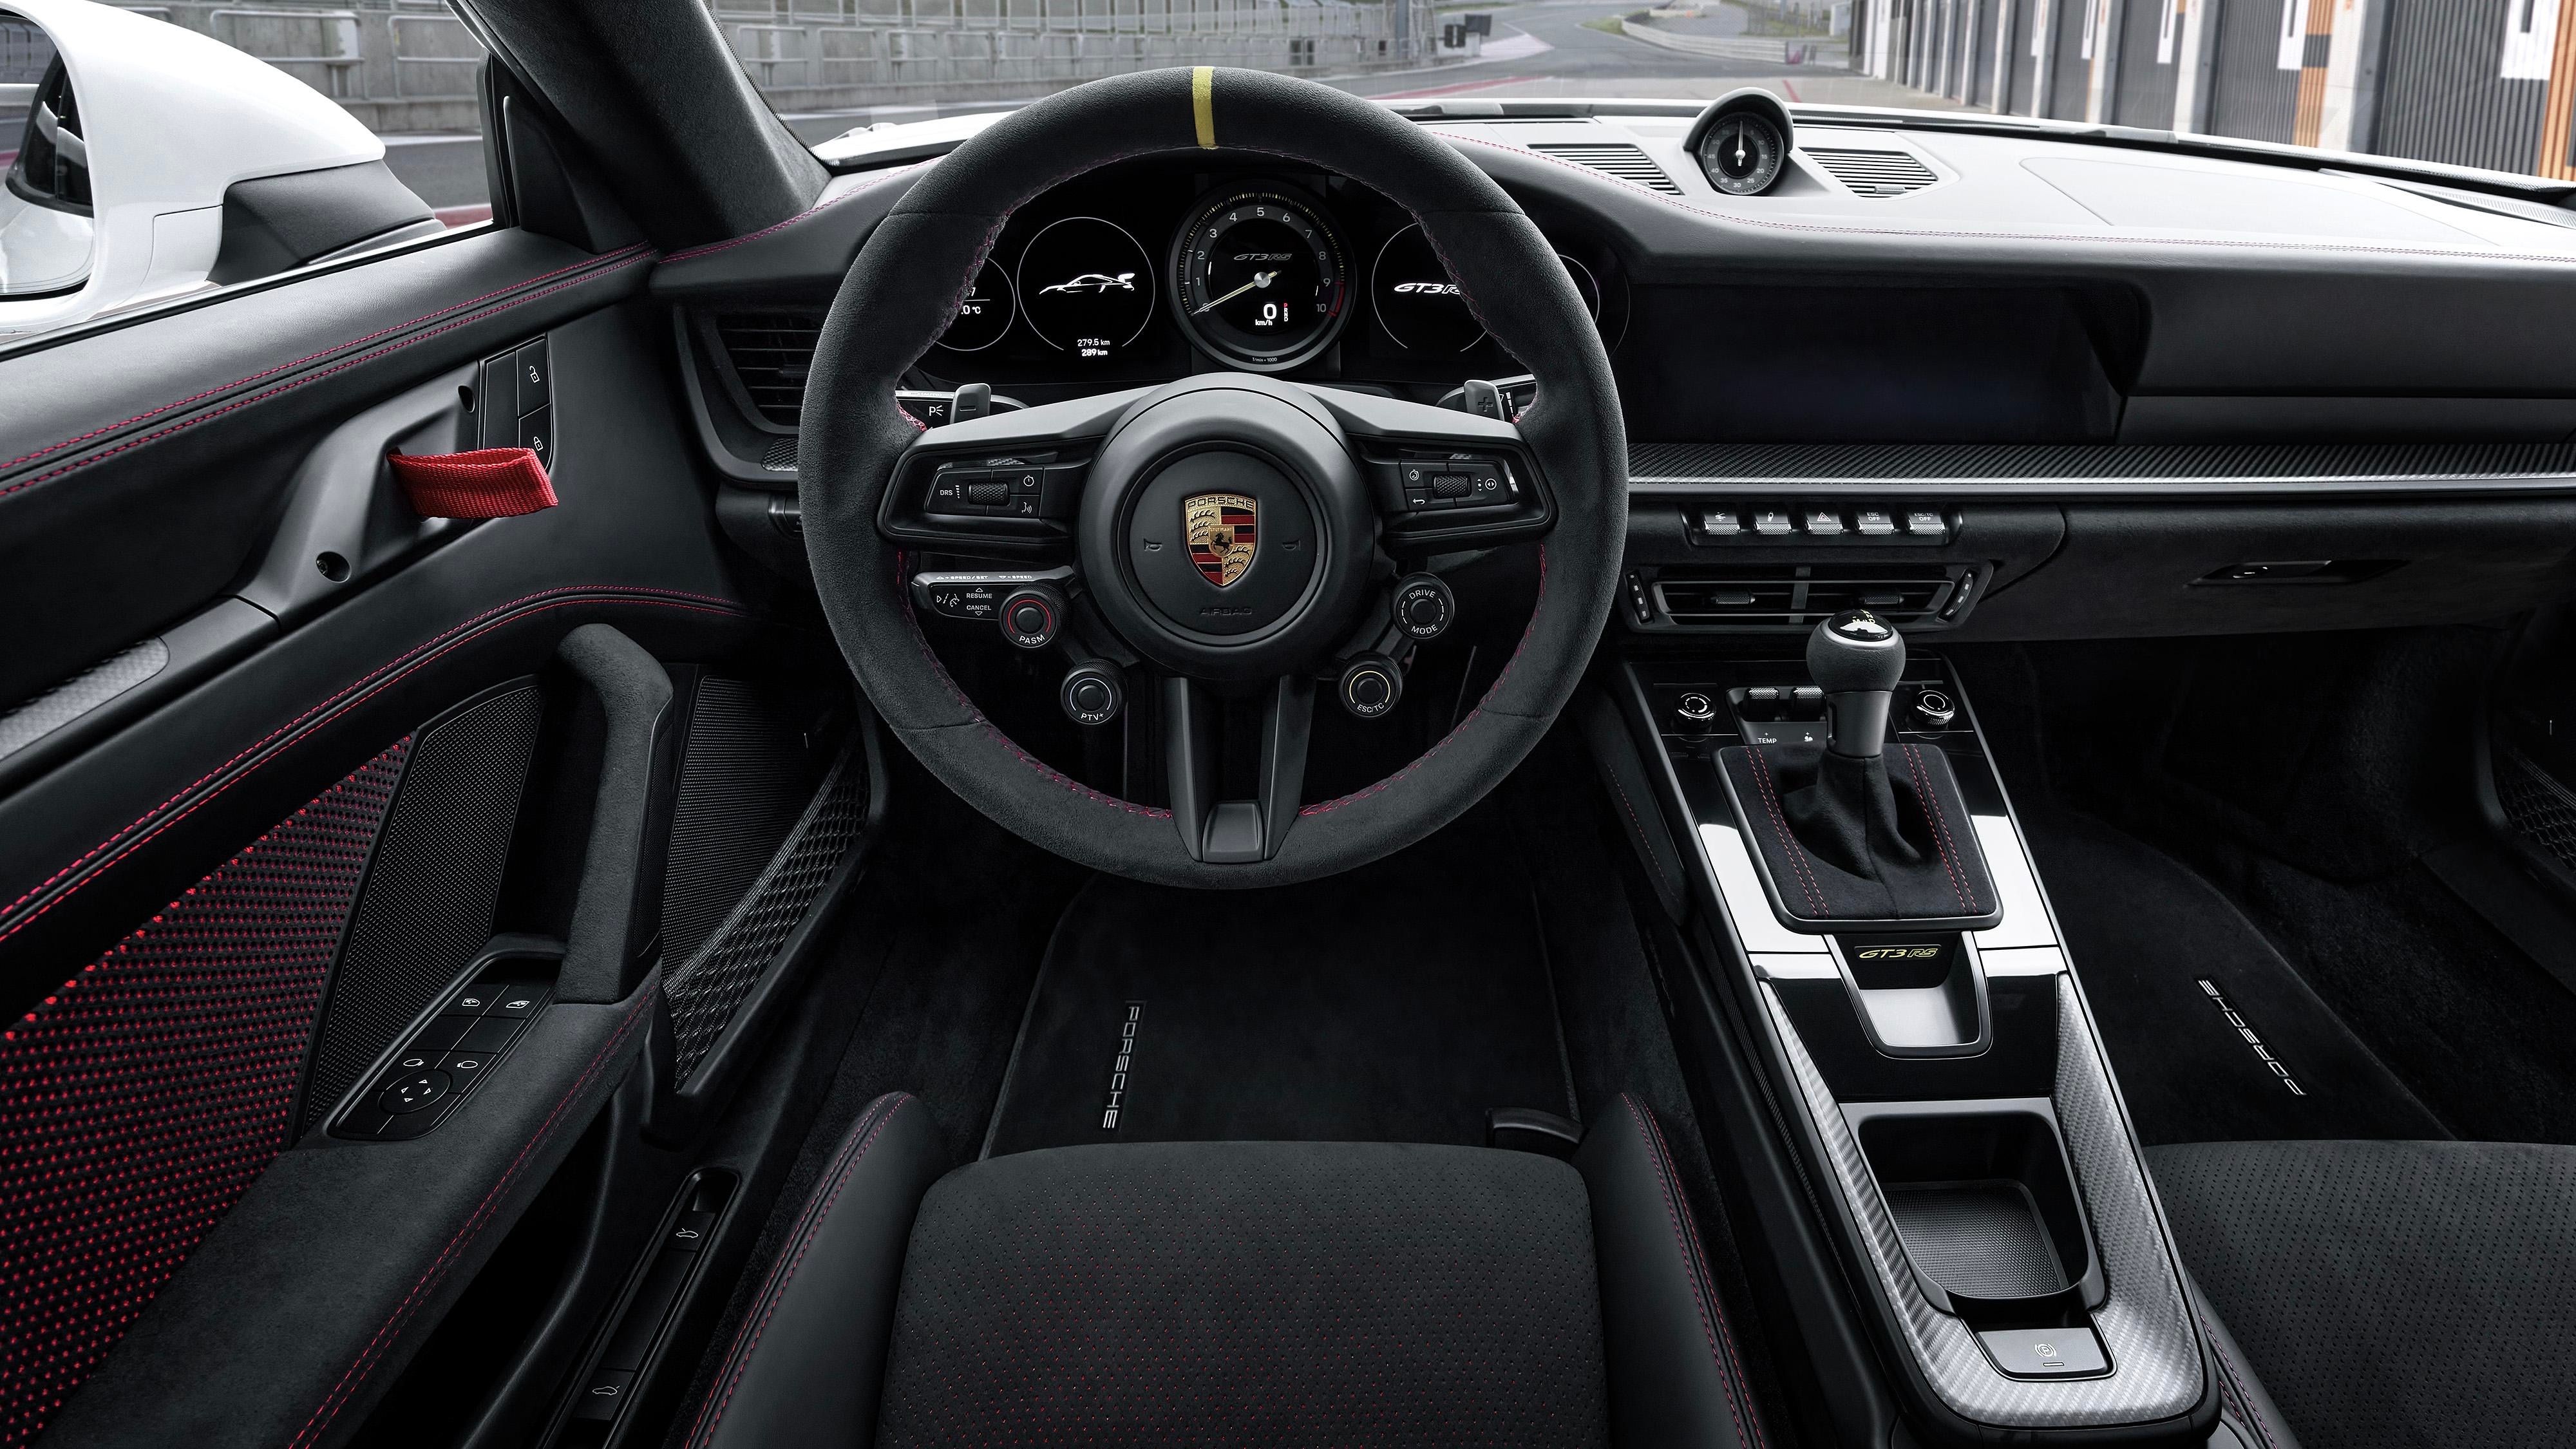 The interior of the Porsche 911 GT3 RS.